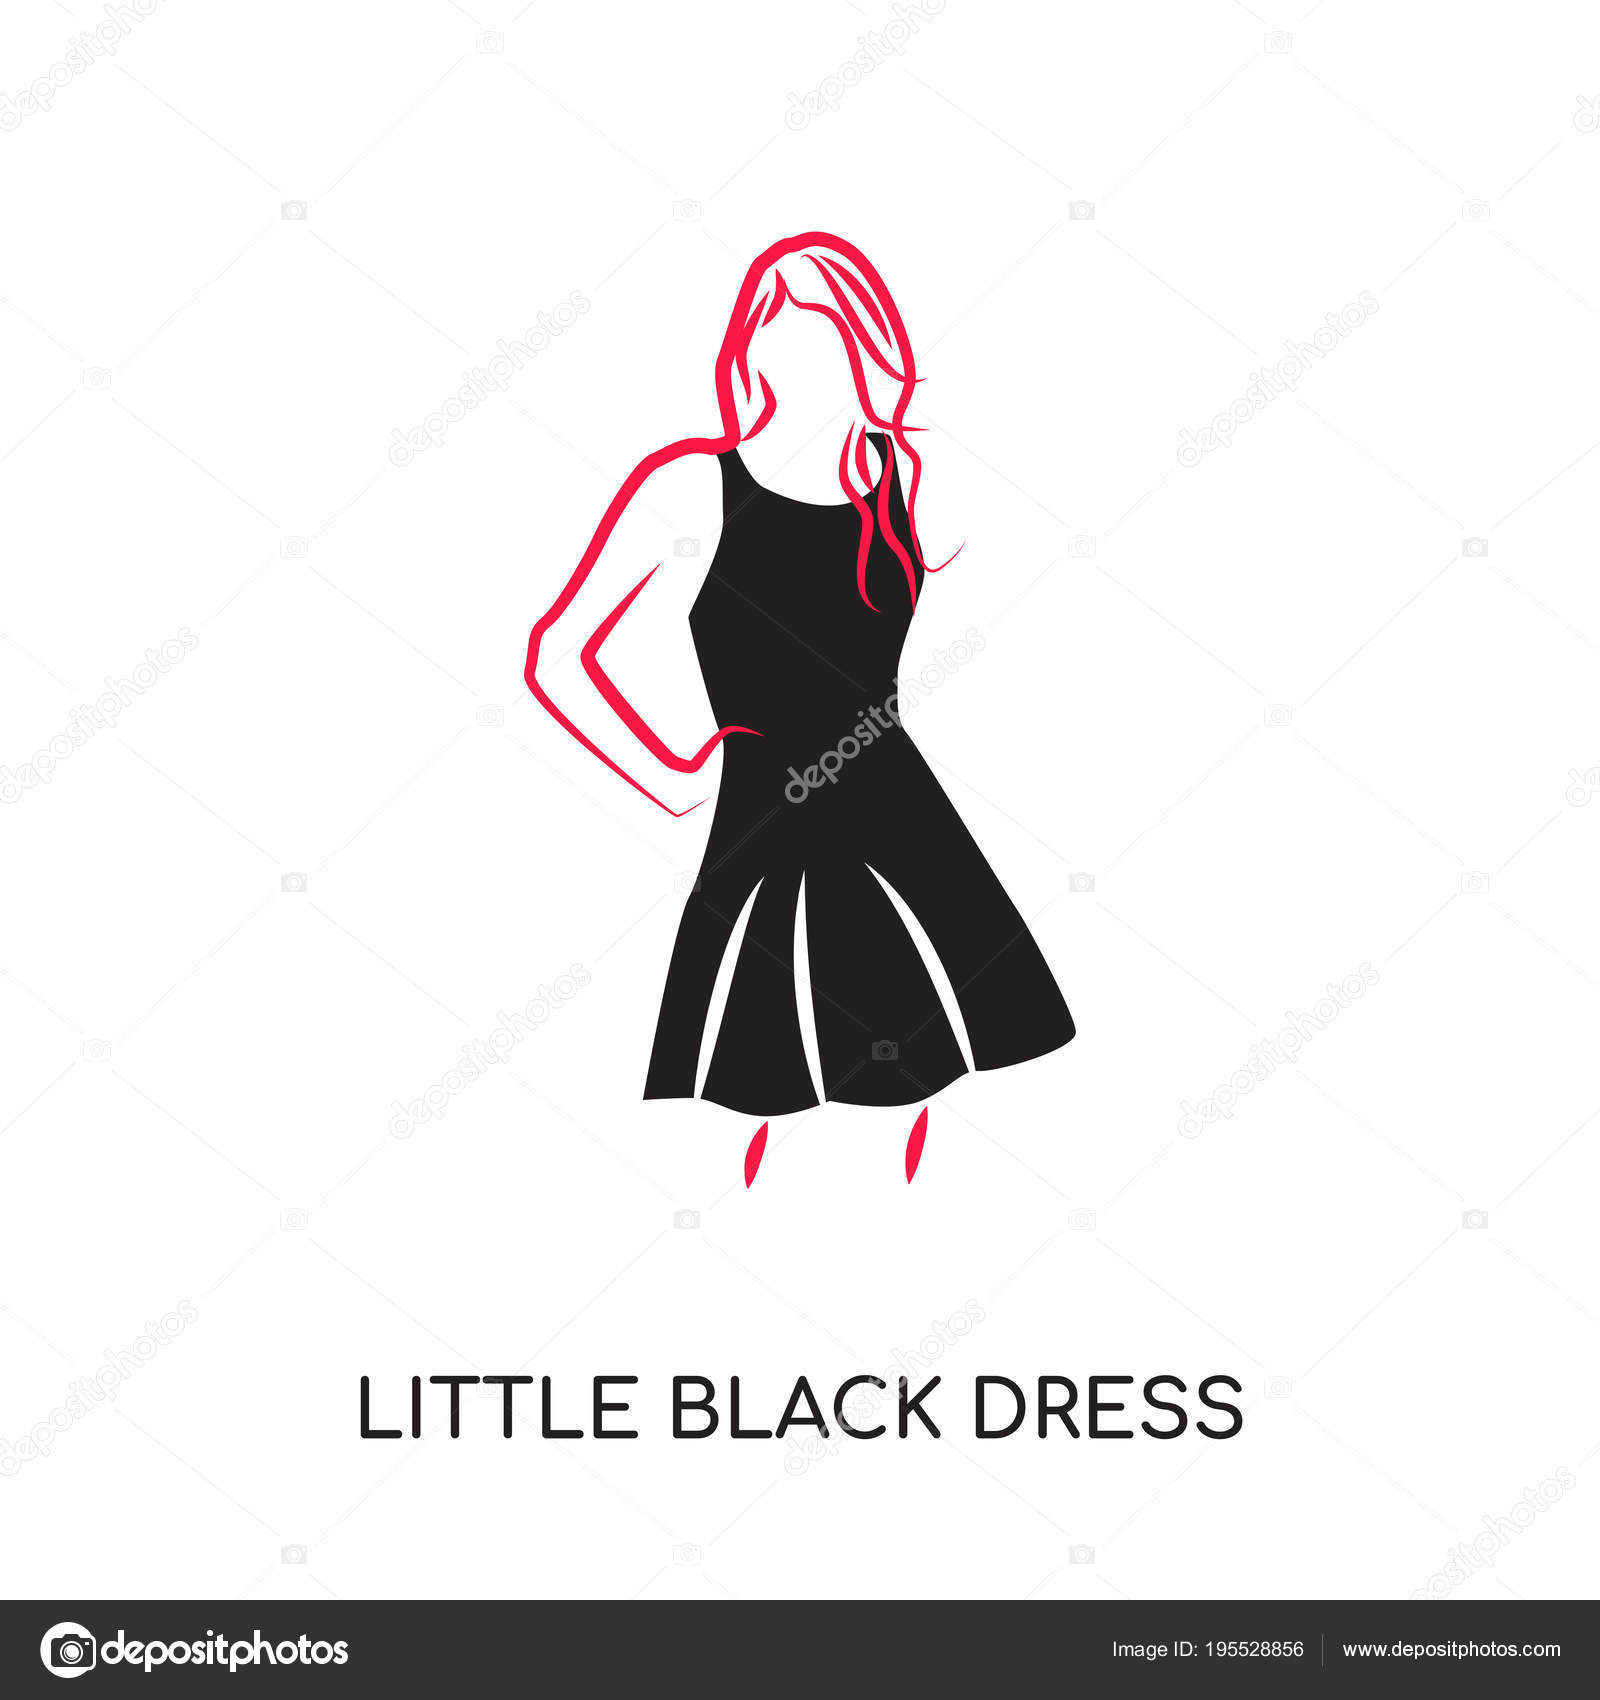 The Birth of the Little Black Dress - ICON-ICON